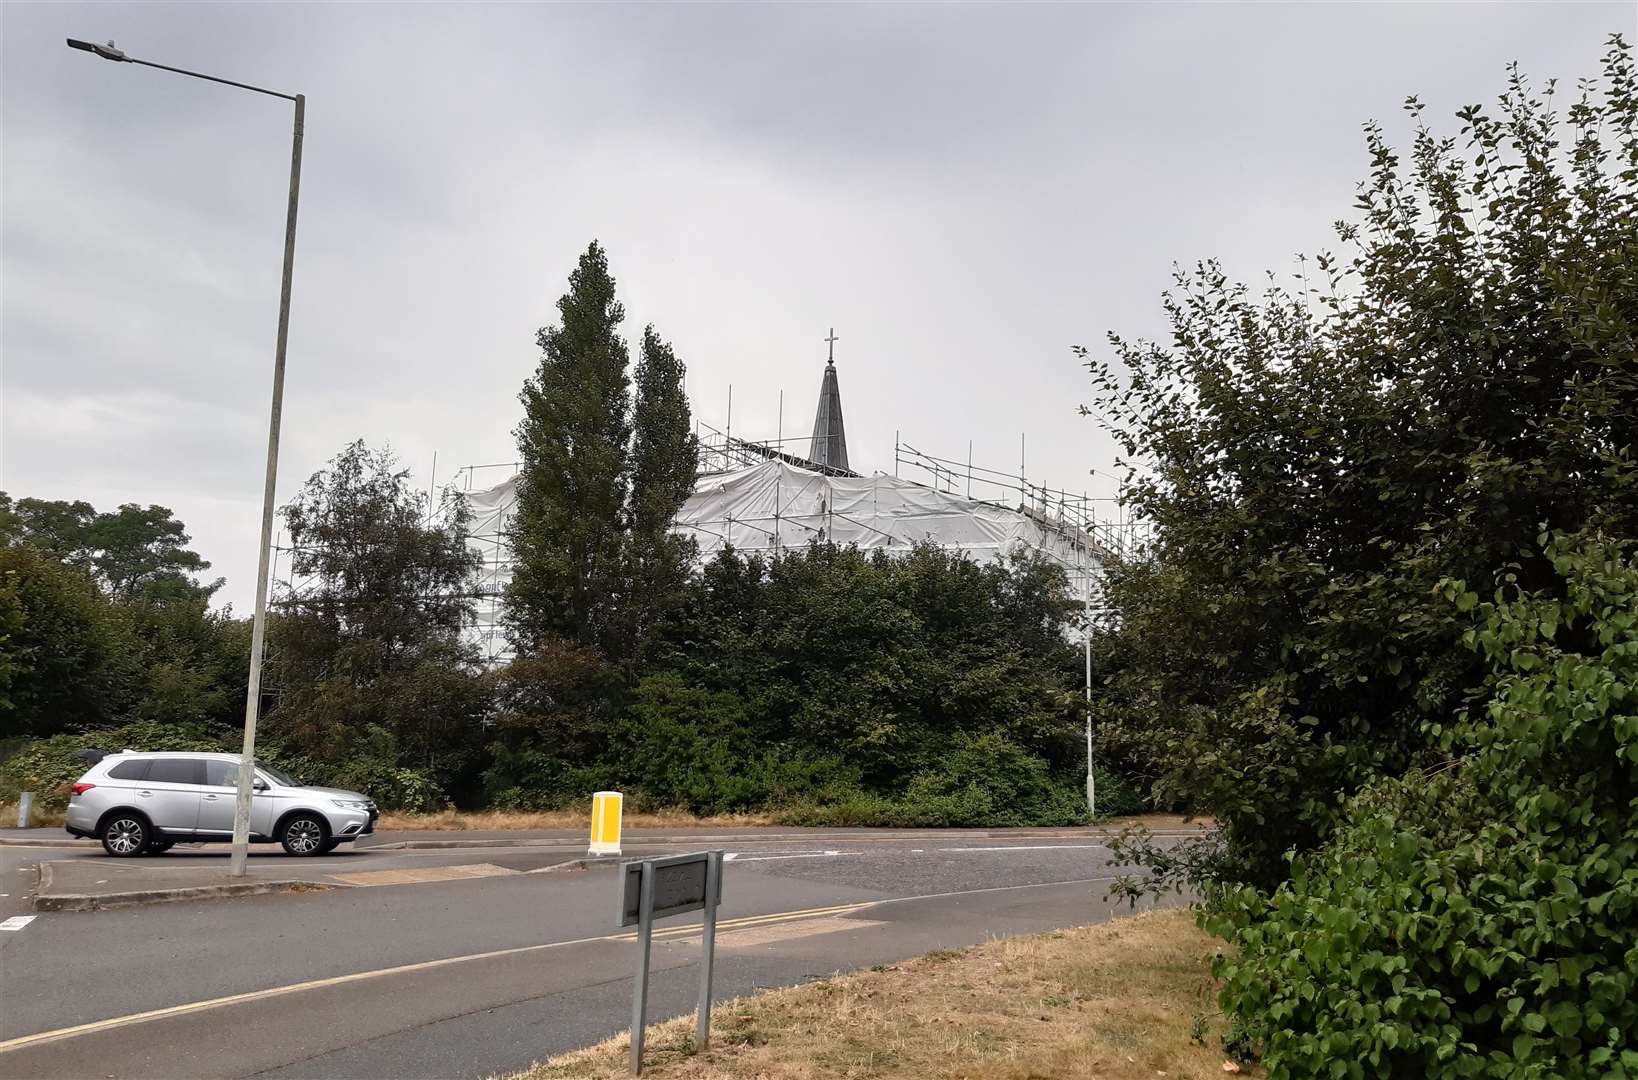 St Teresa's in Maidstone Road, Ashford, is having its roof replaced